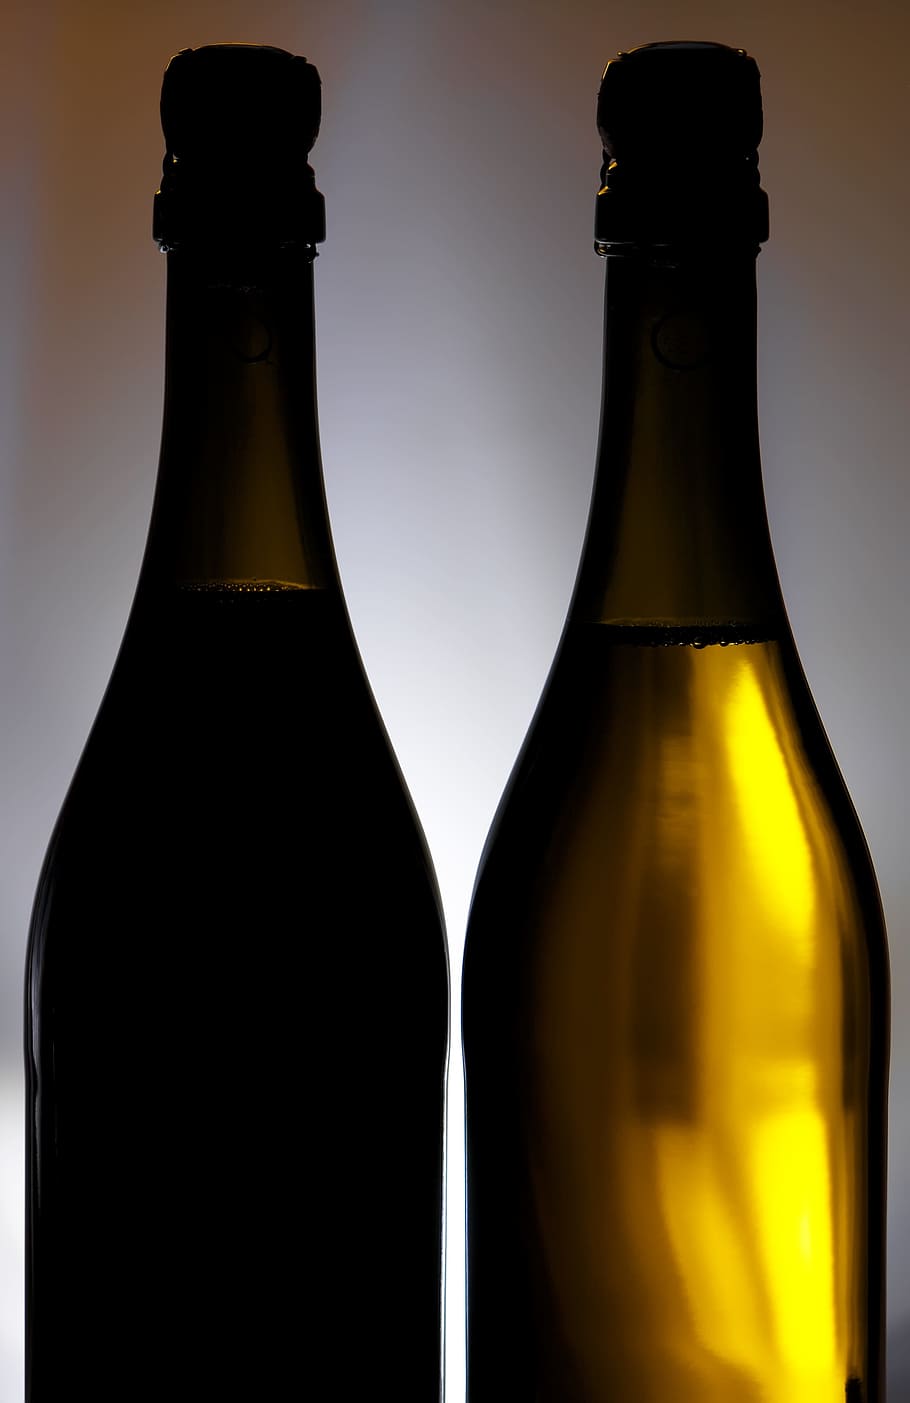 bottles, vine, wine, yellow, glass, pair, two, drink, bottle, alcohol